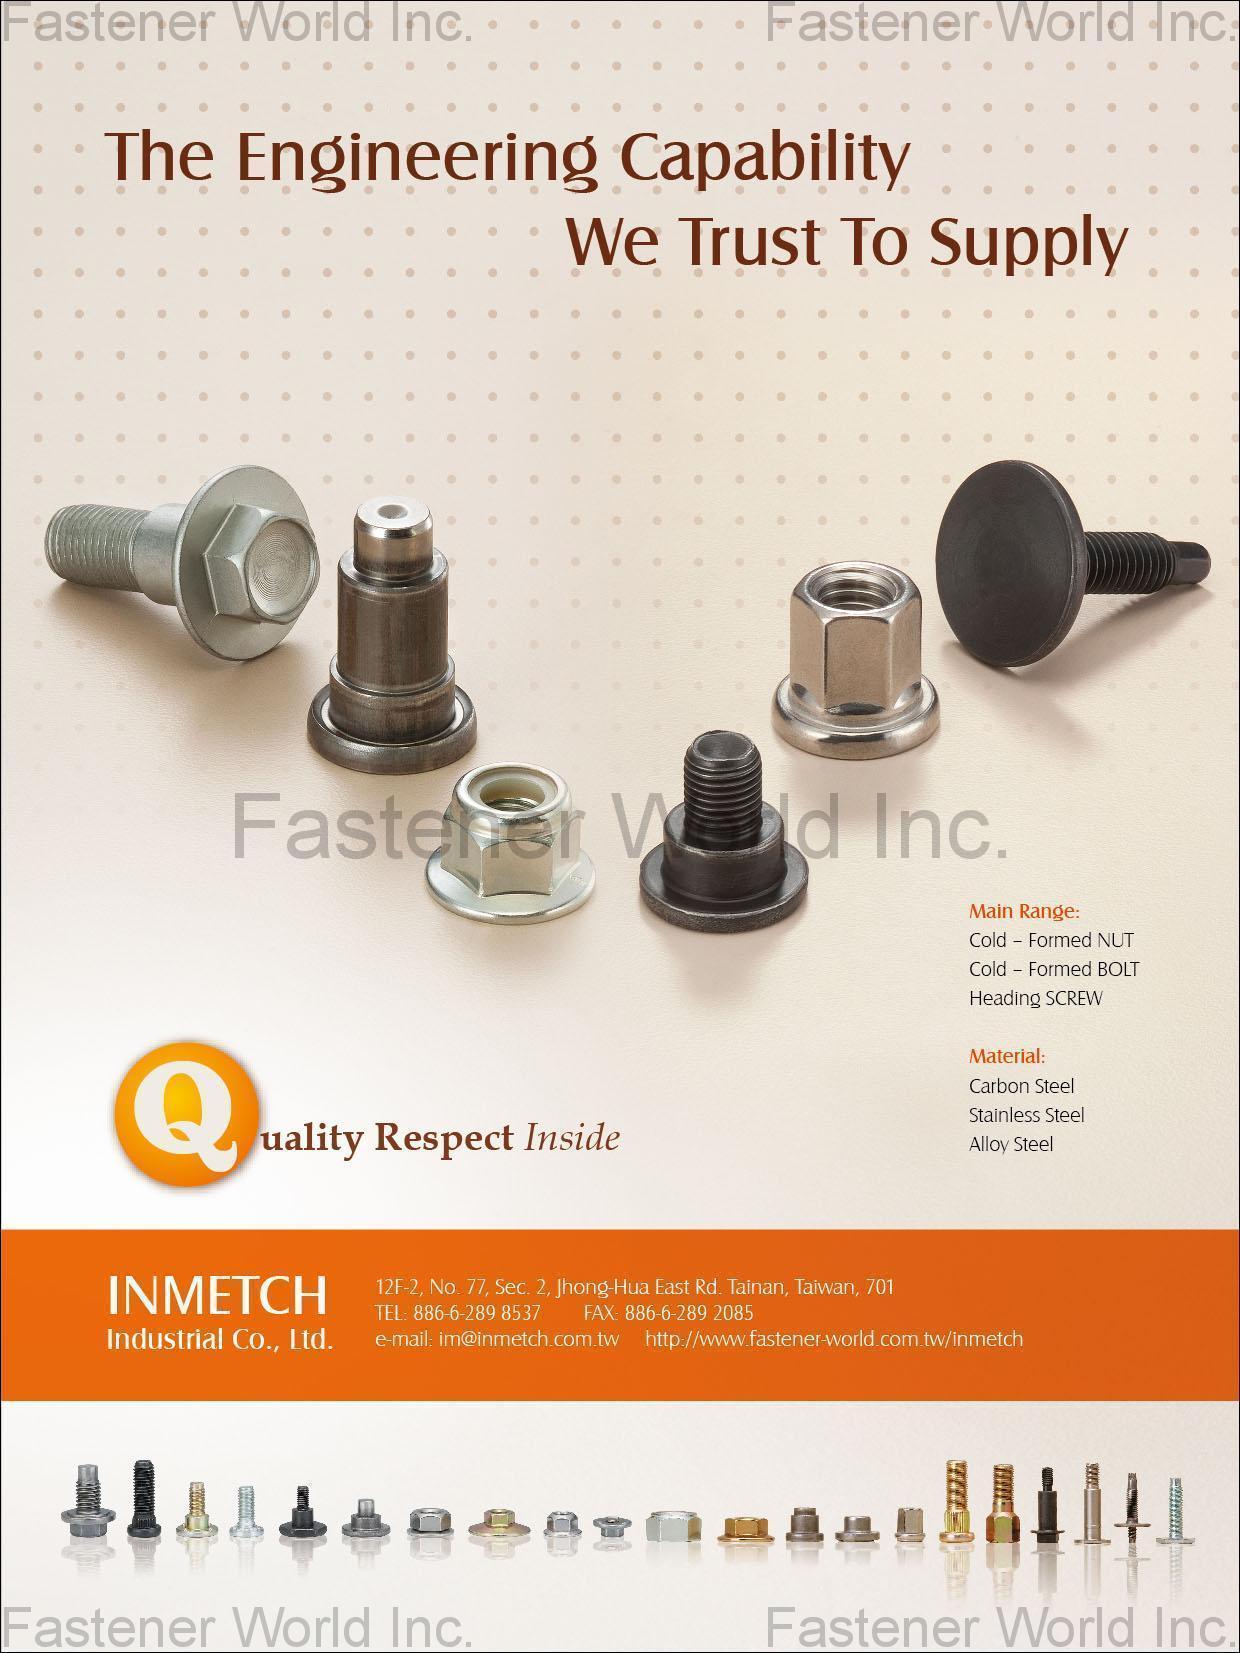 INMETCH INDUSTRIAL CO., LTD.  , Cold-Forged Thread Fasteners, Automotive (Seat Belt, Airbag, Seat, Bake System, Interior System, Engine System), Building Fasteners (Woodhouse, Building), Industrial Fasteners , All Kinds Of Nuts